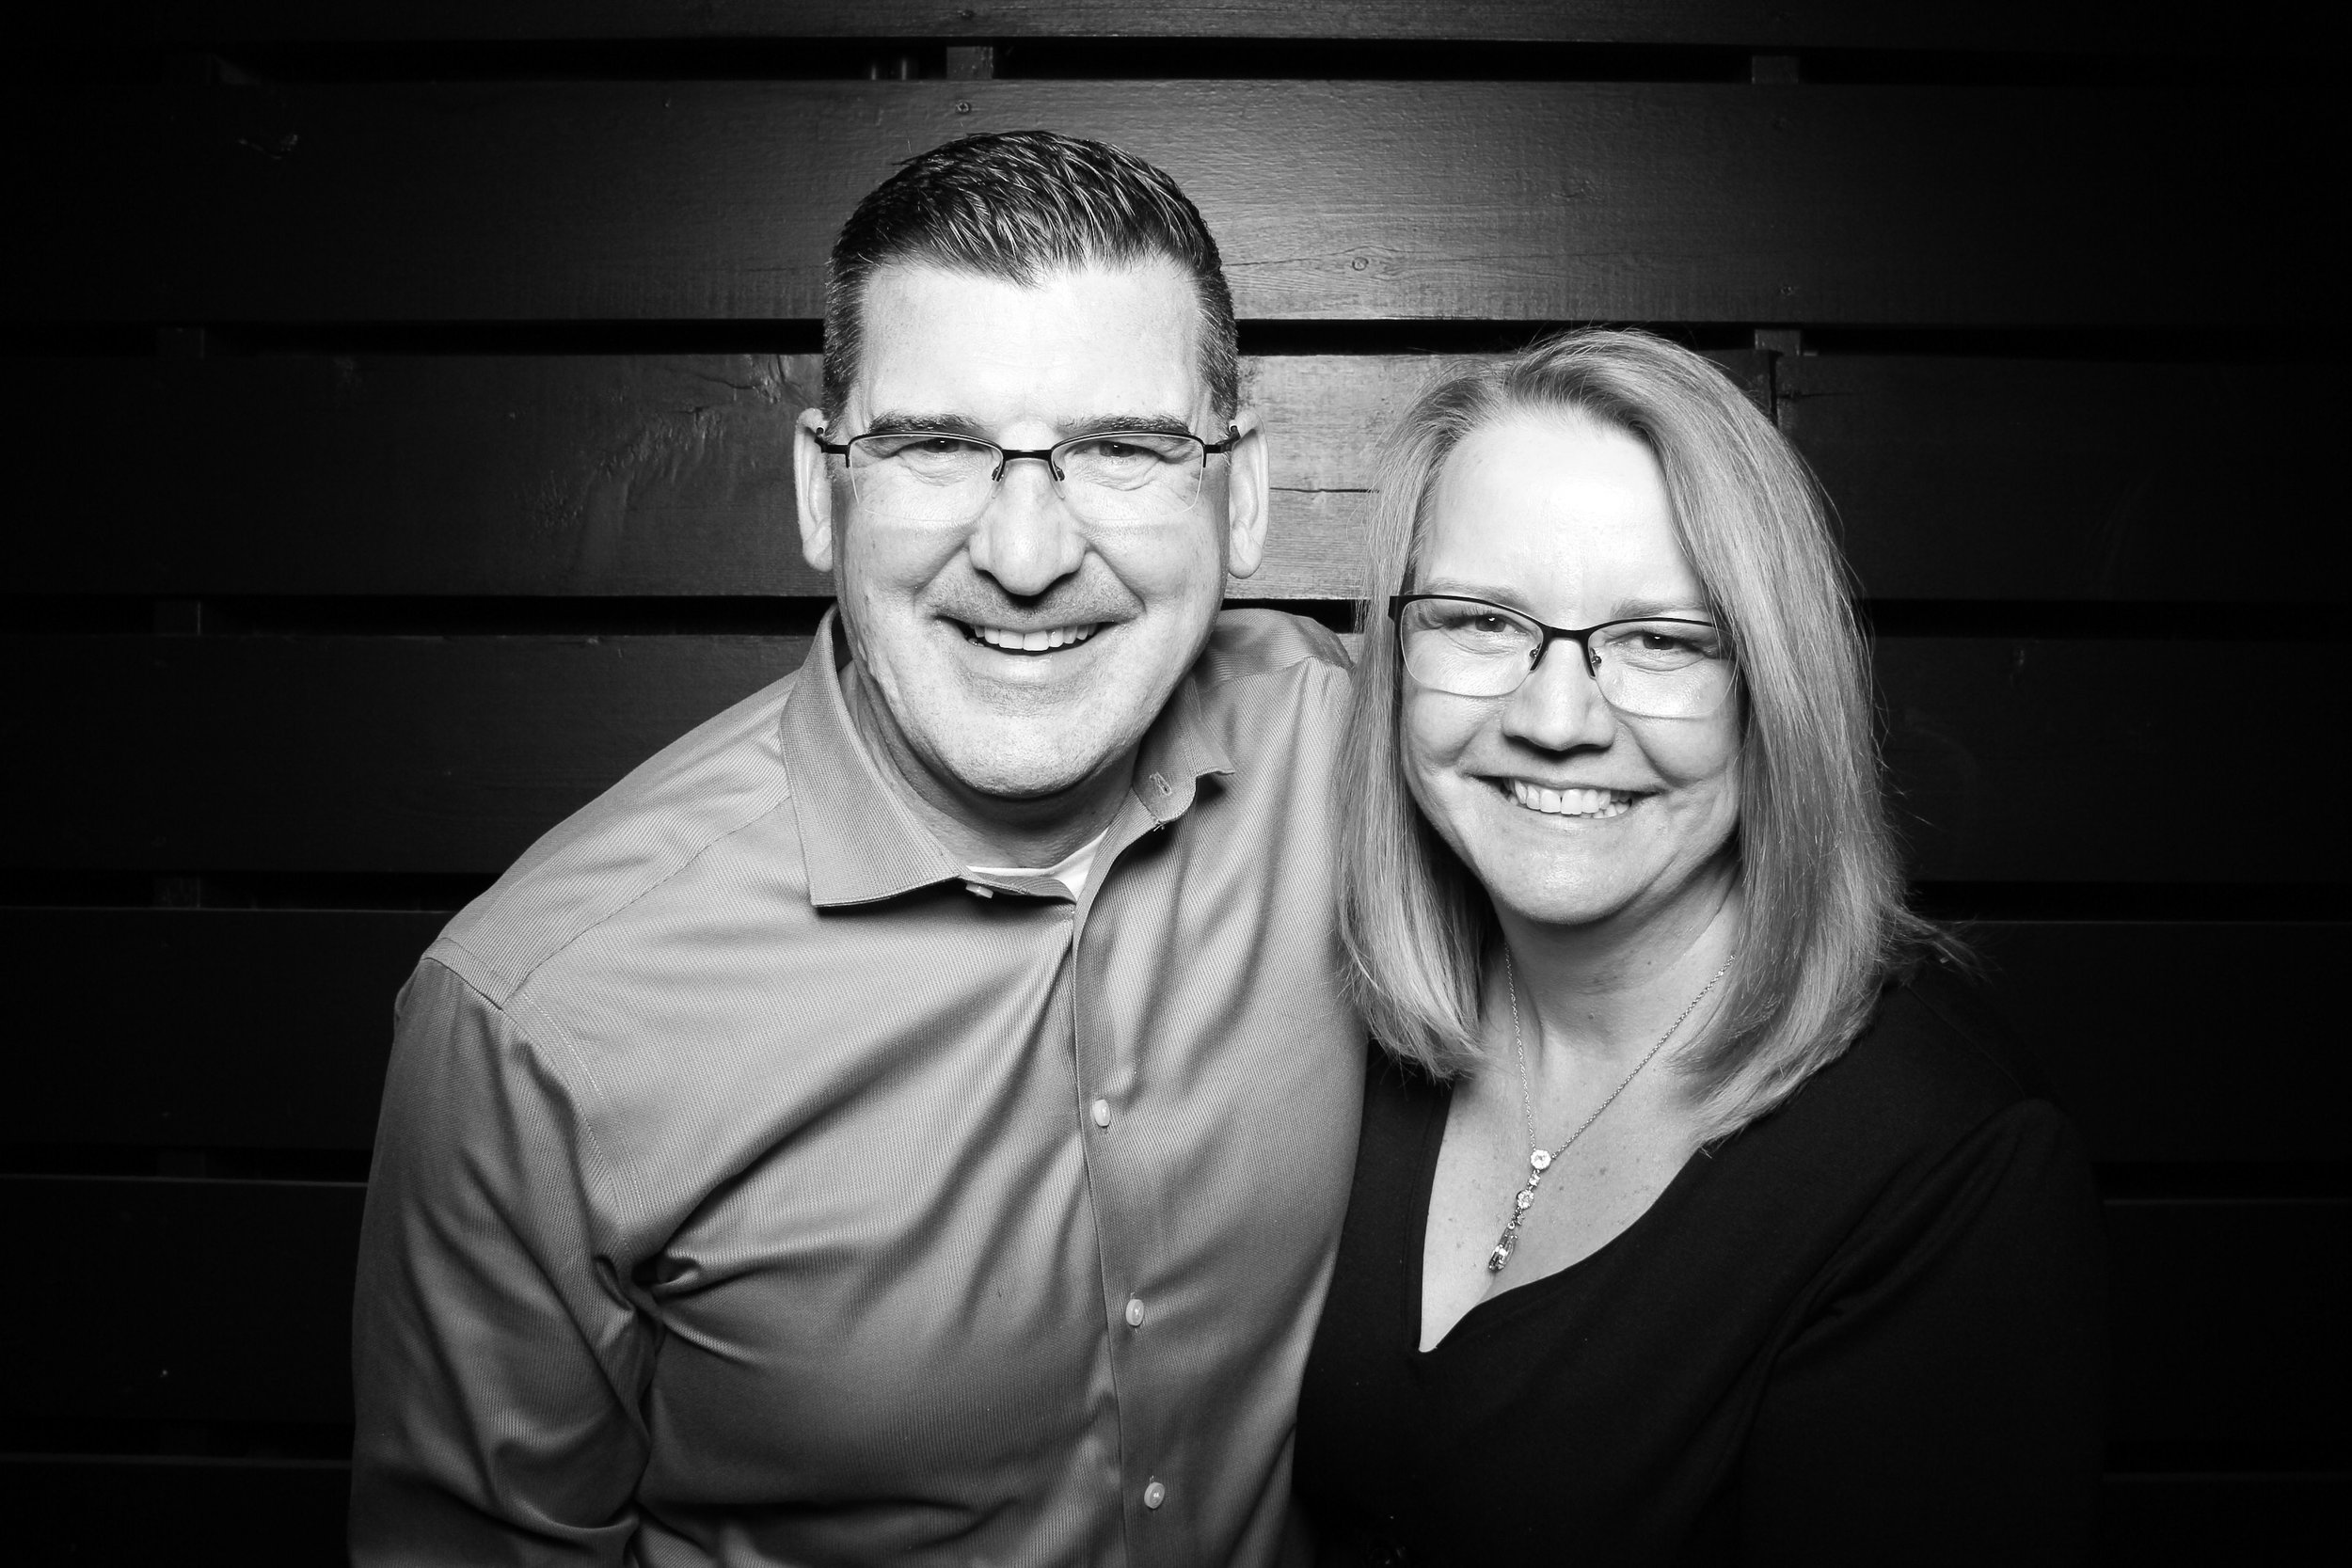 Fotio_Photo_Booth_Chicago_Winery_Clark_Street_Party_Family_Fun_Terrace_Superfans_River_North_02.jpg